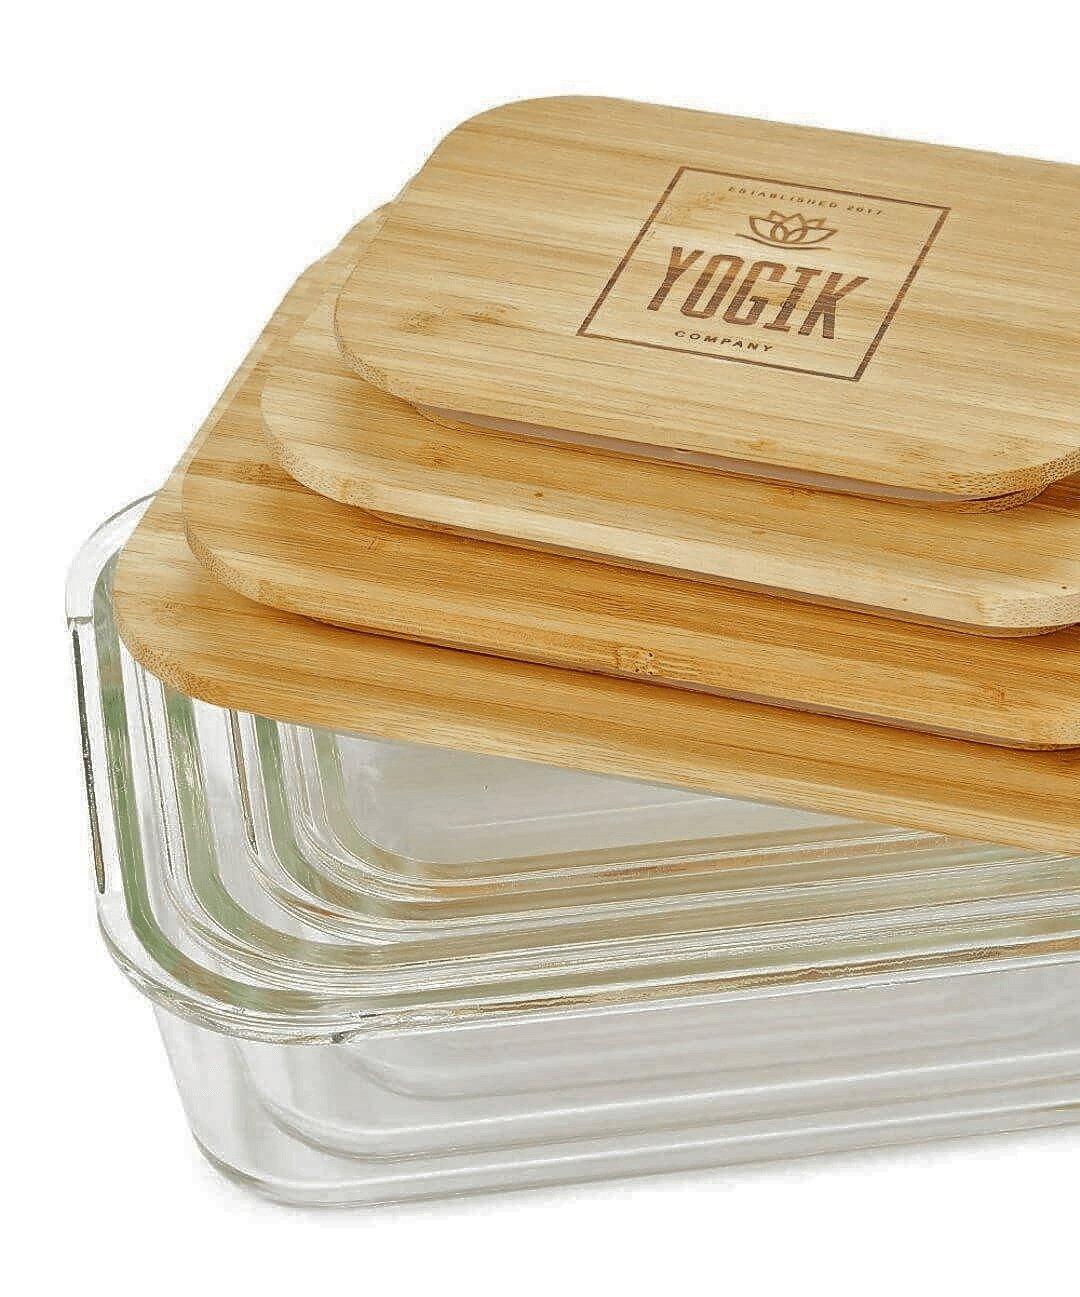 YogiK Glass Food Storage Containers with Eco-Friendly Bamboo Lids